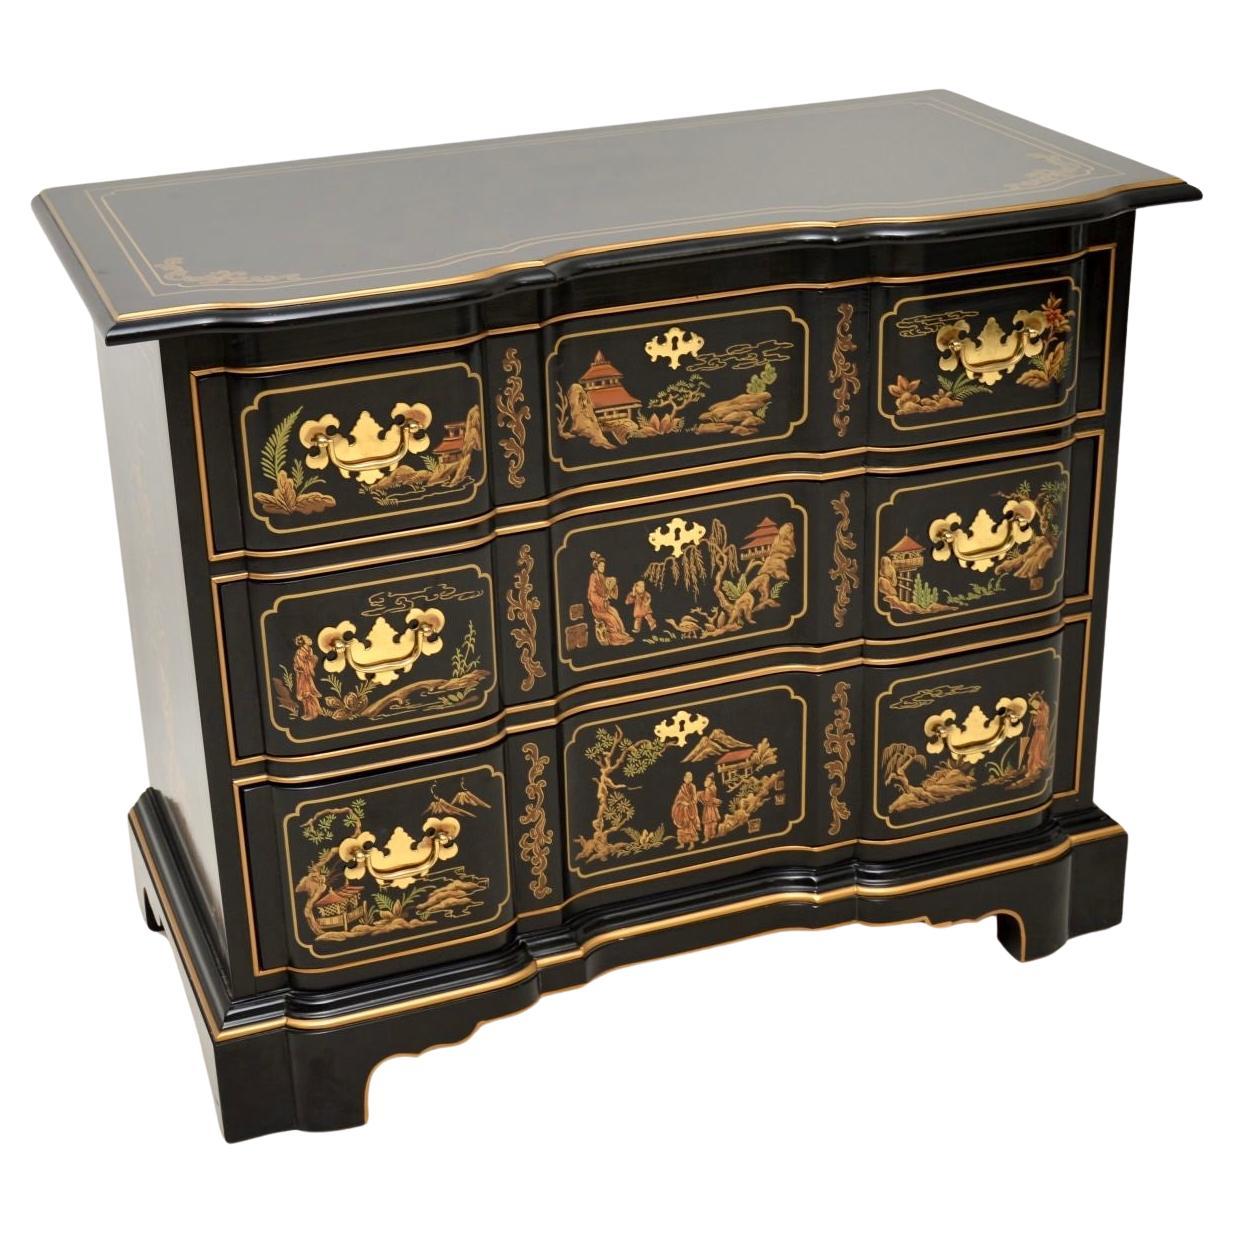 Antique Georgian Style Lacquered Chinoiserie Chest of Drawers